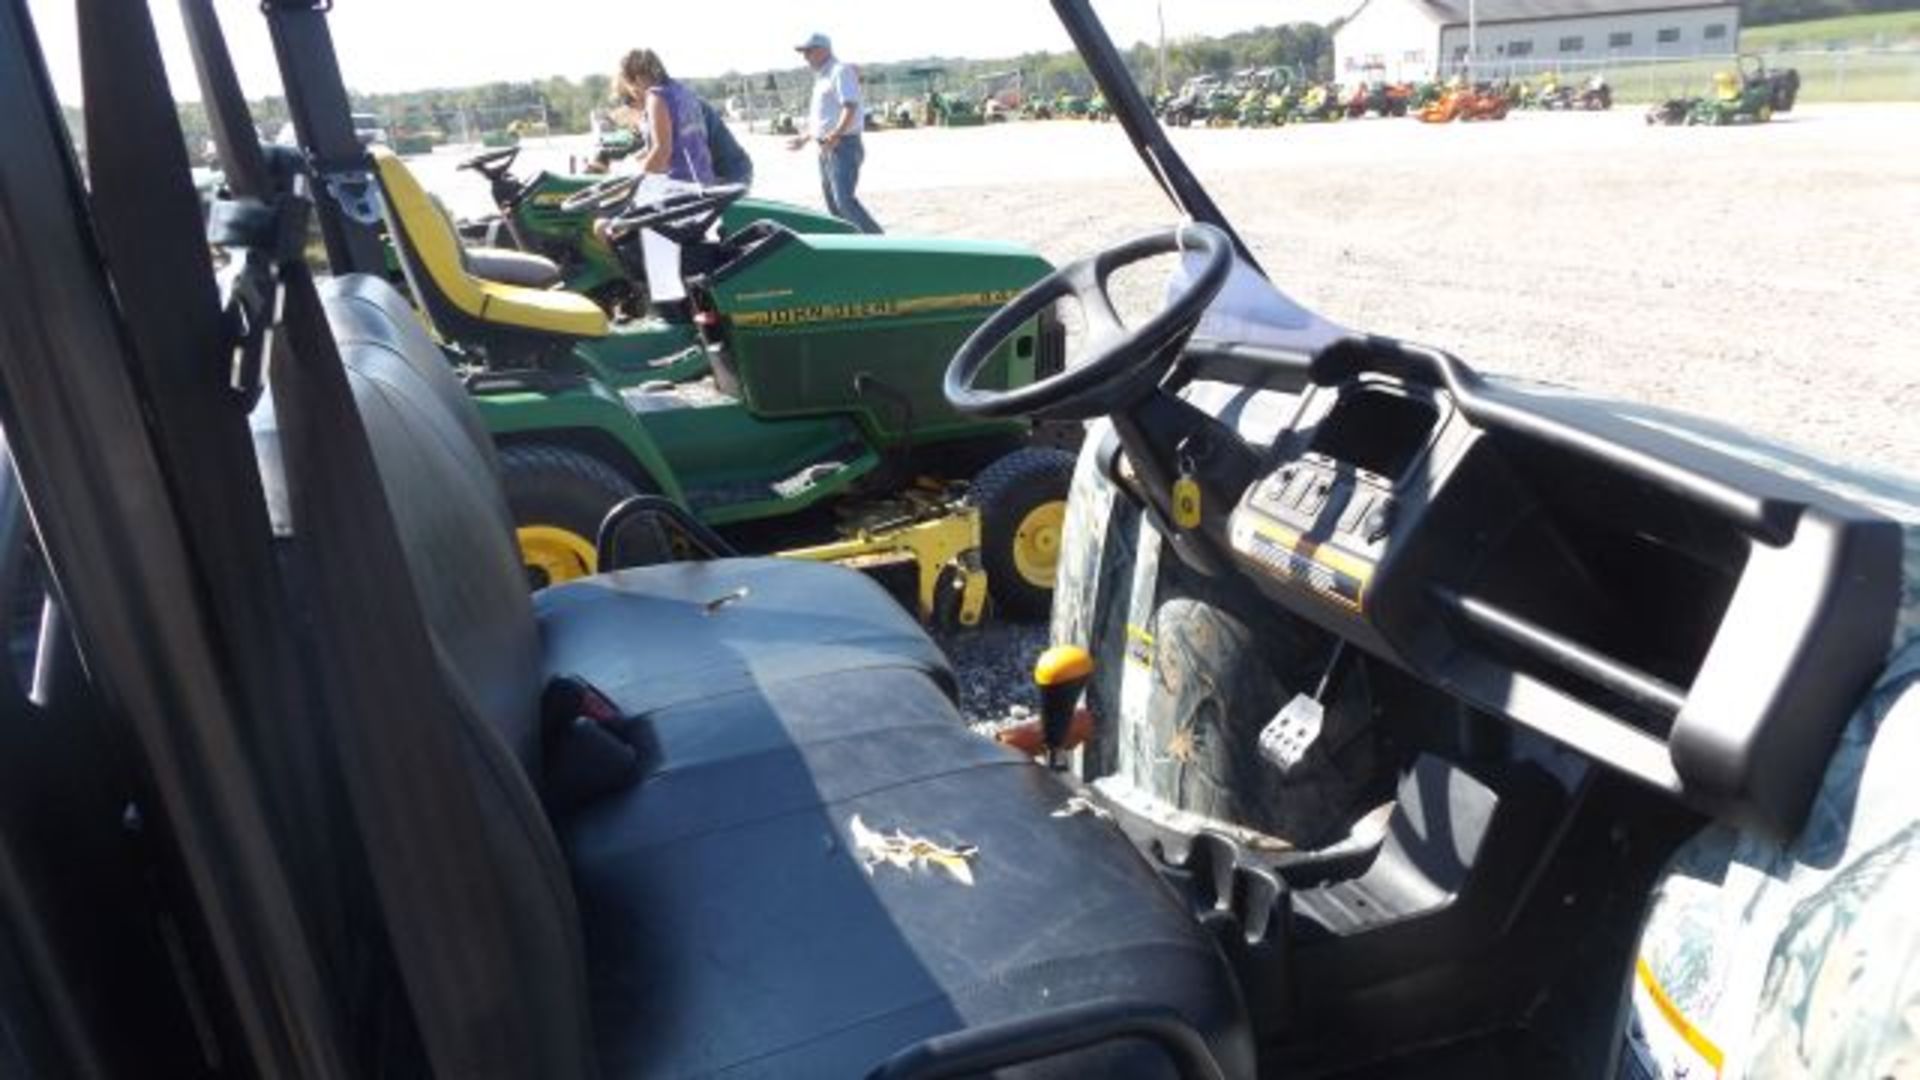 2011 JD 855D Gator #111408, 475 hrs, 4wd, Diesel, 24hp Yanmar, Water Cooled, Traction Tires, Black - Image 3 of 4